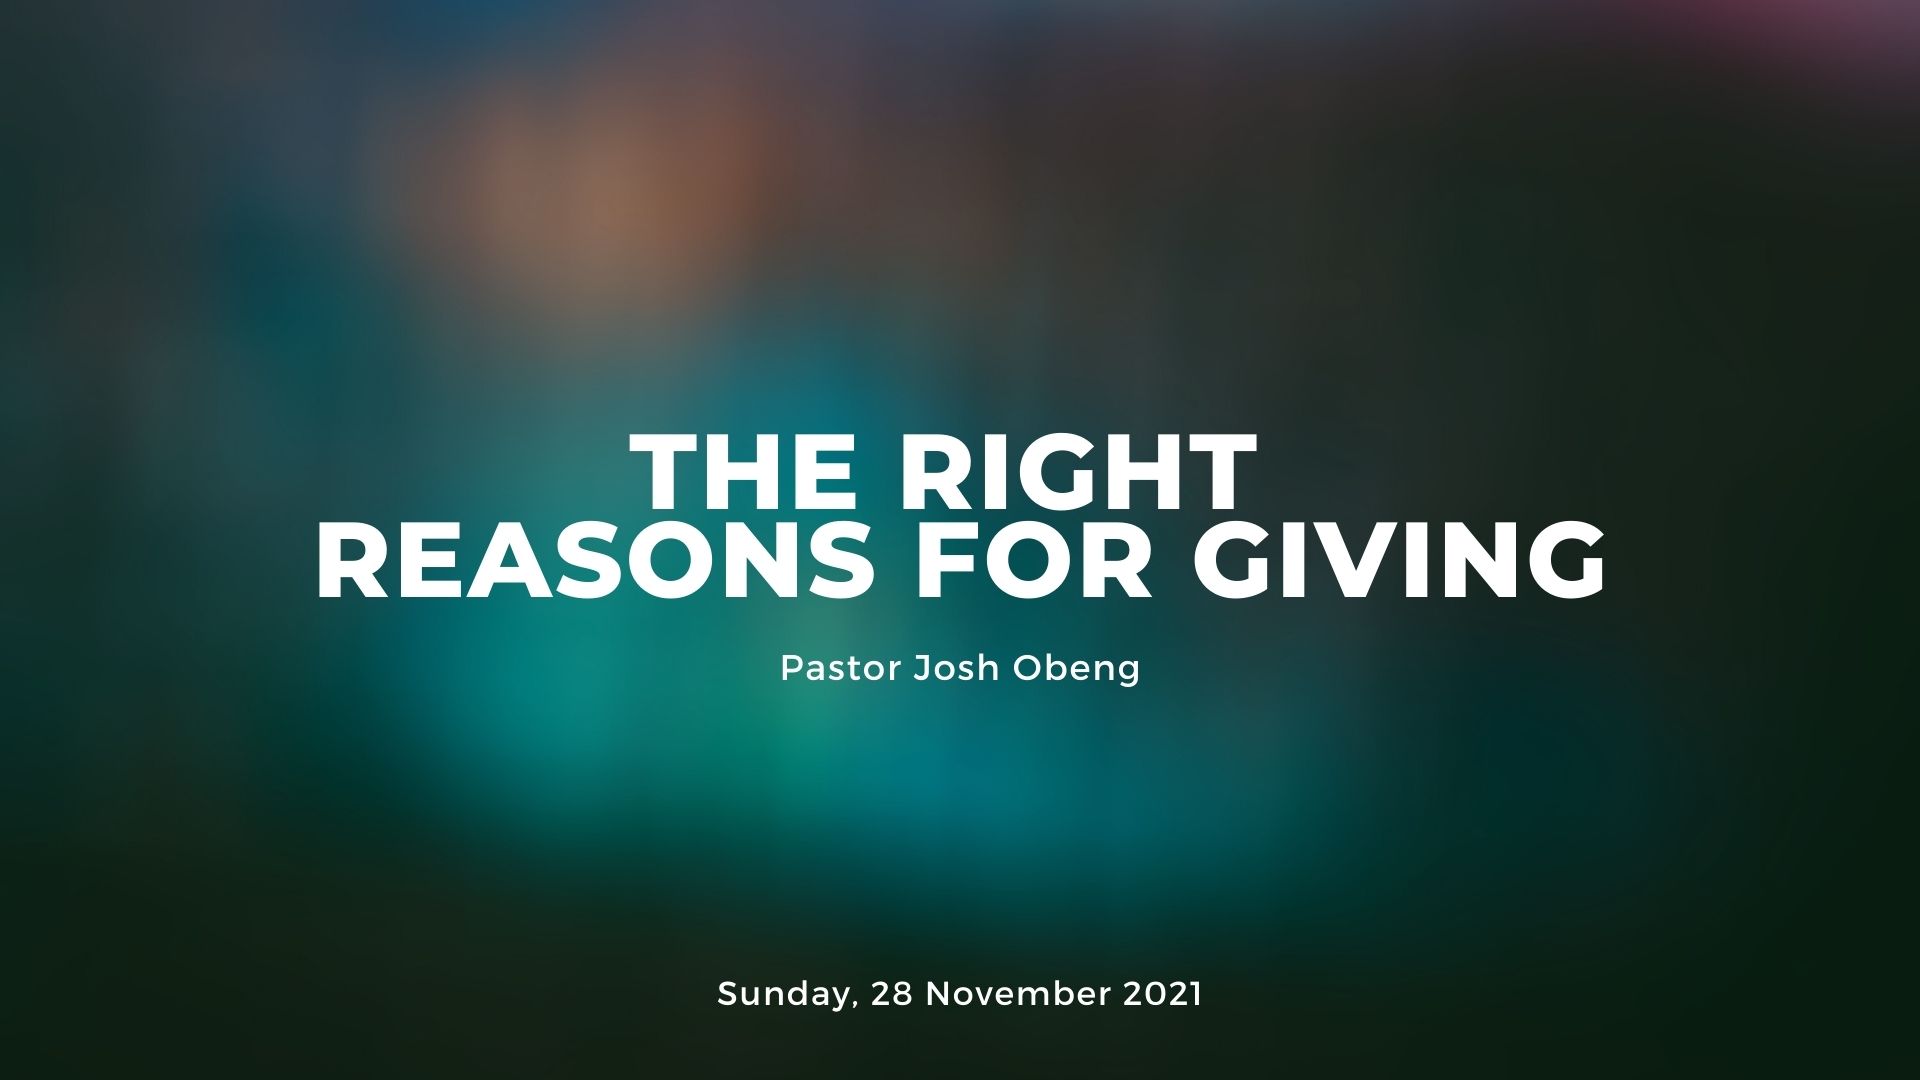 THE RIGHT REASONS FOR GIVING